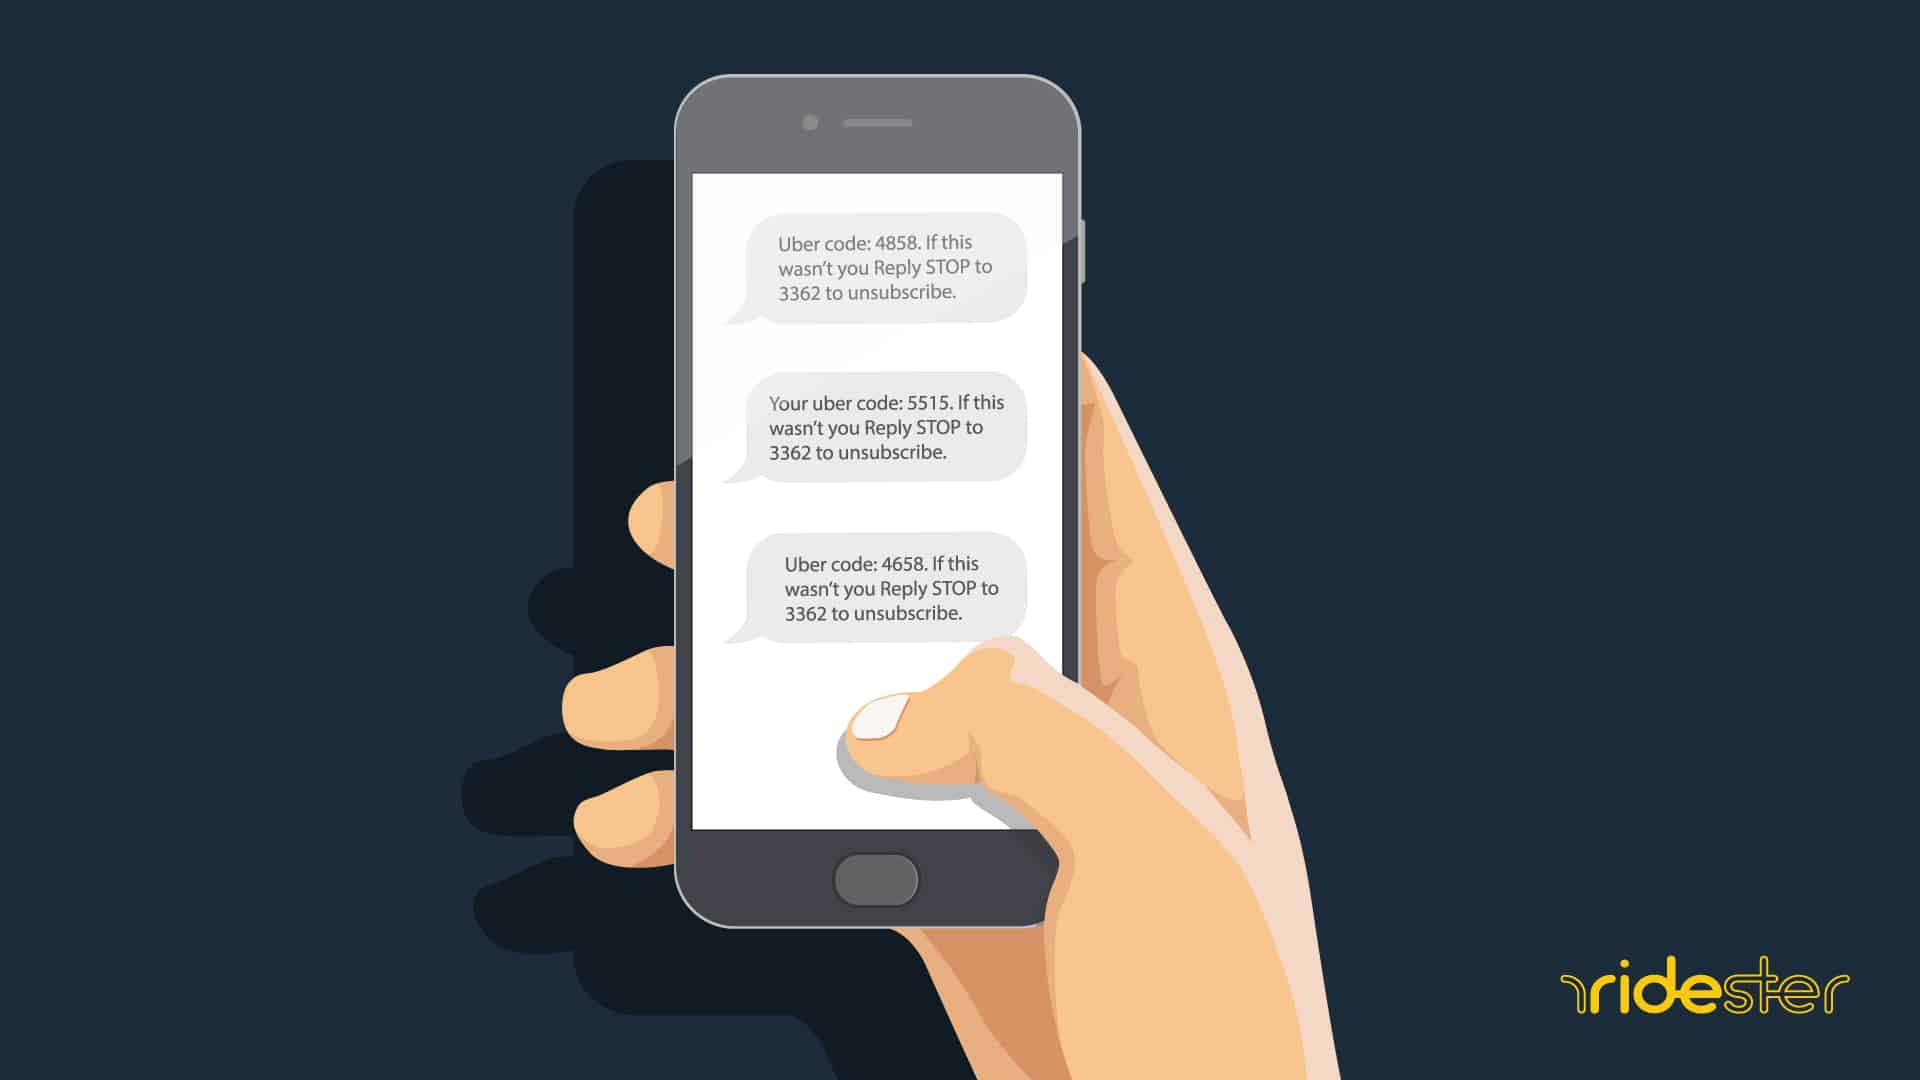 vector illustration of a hand holding a mobile phone that has just received an uber code text